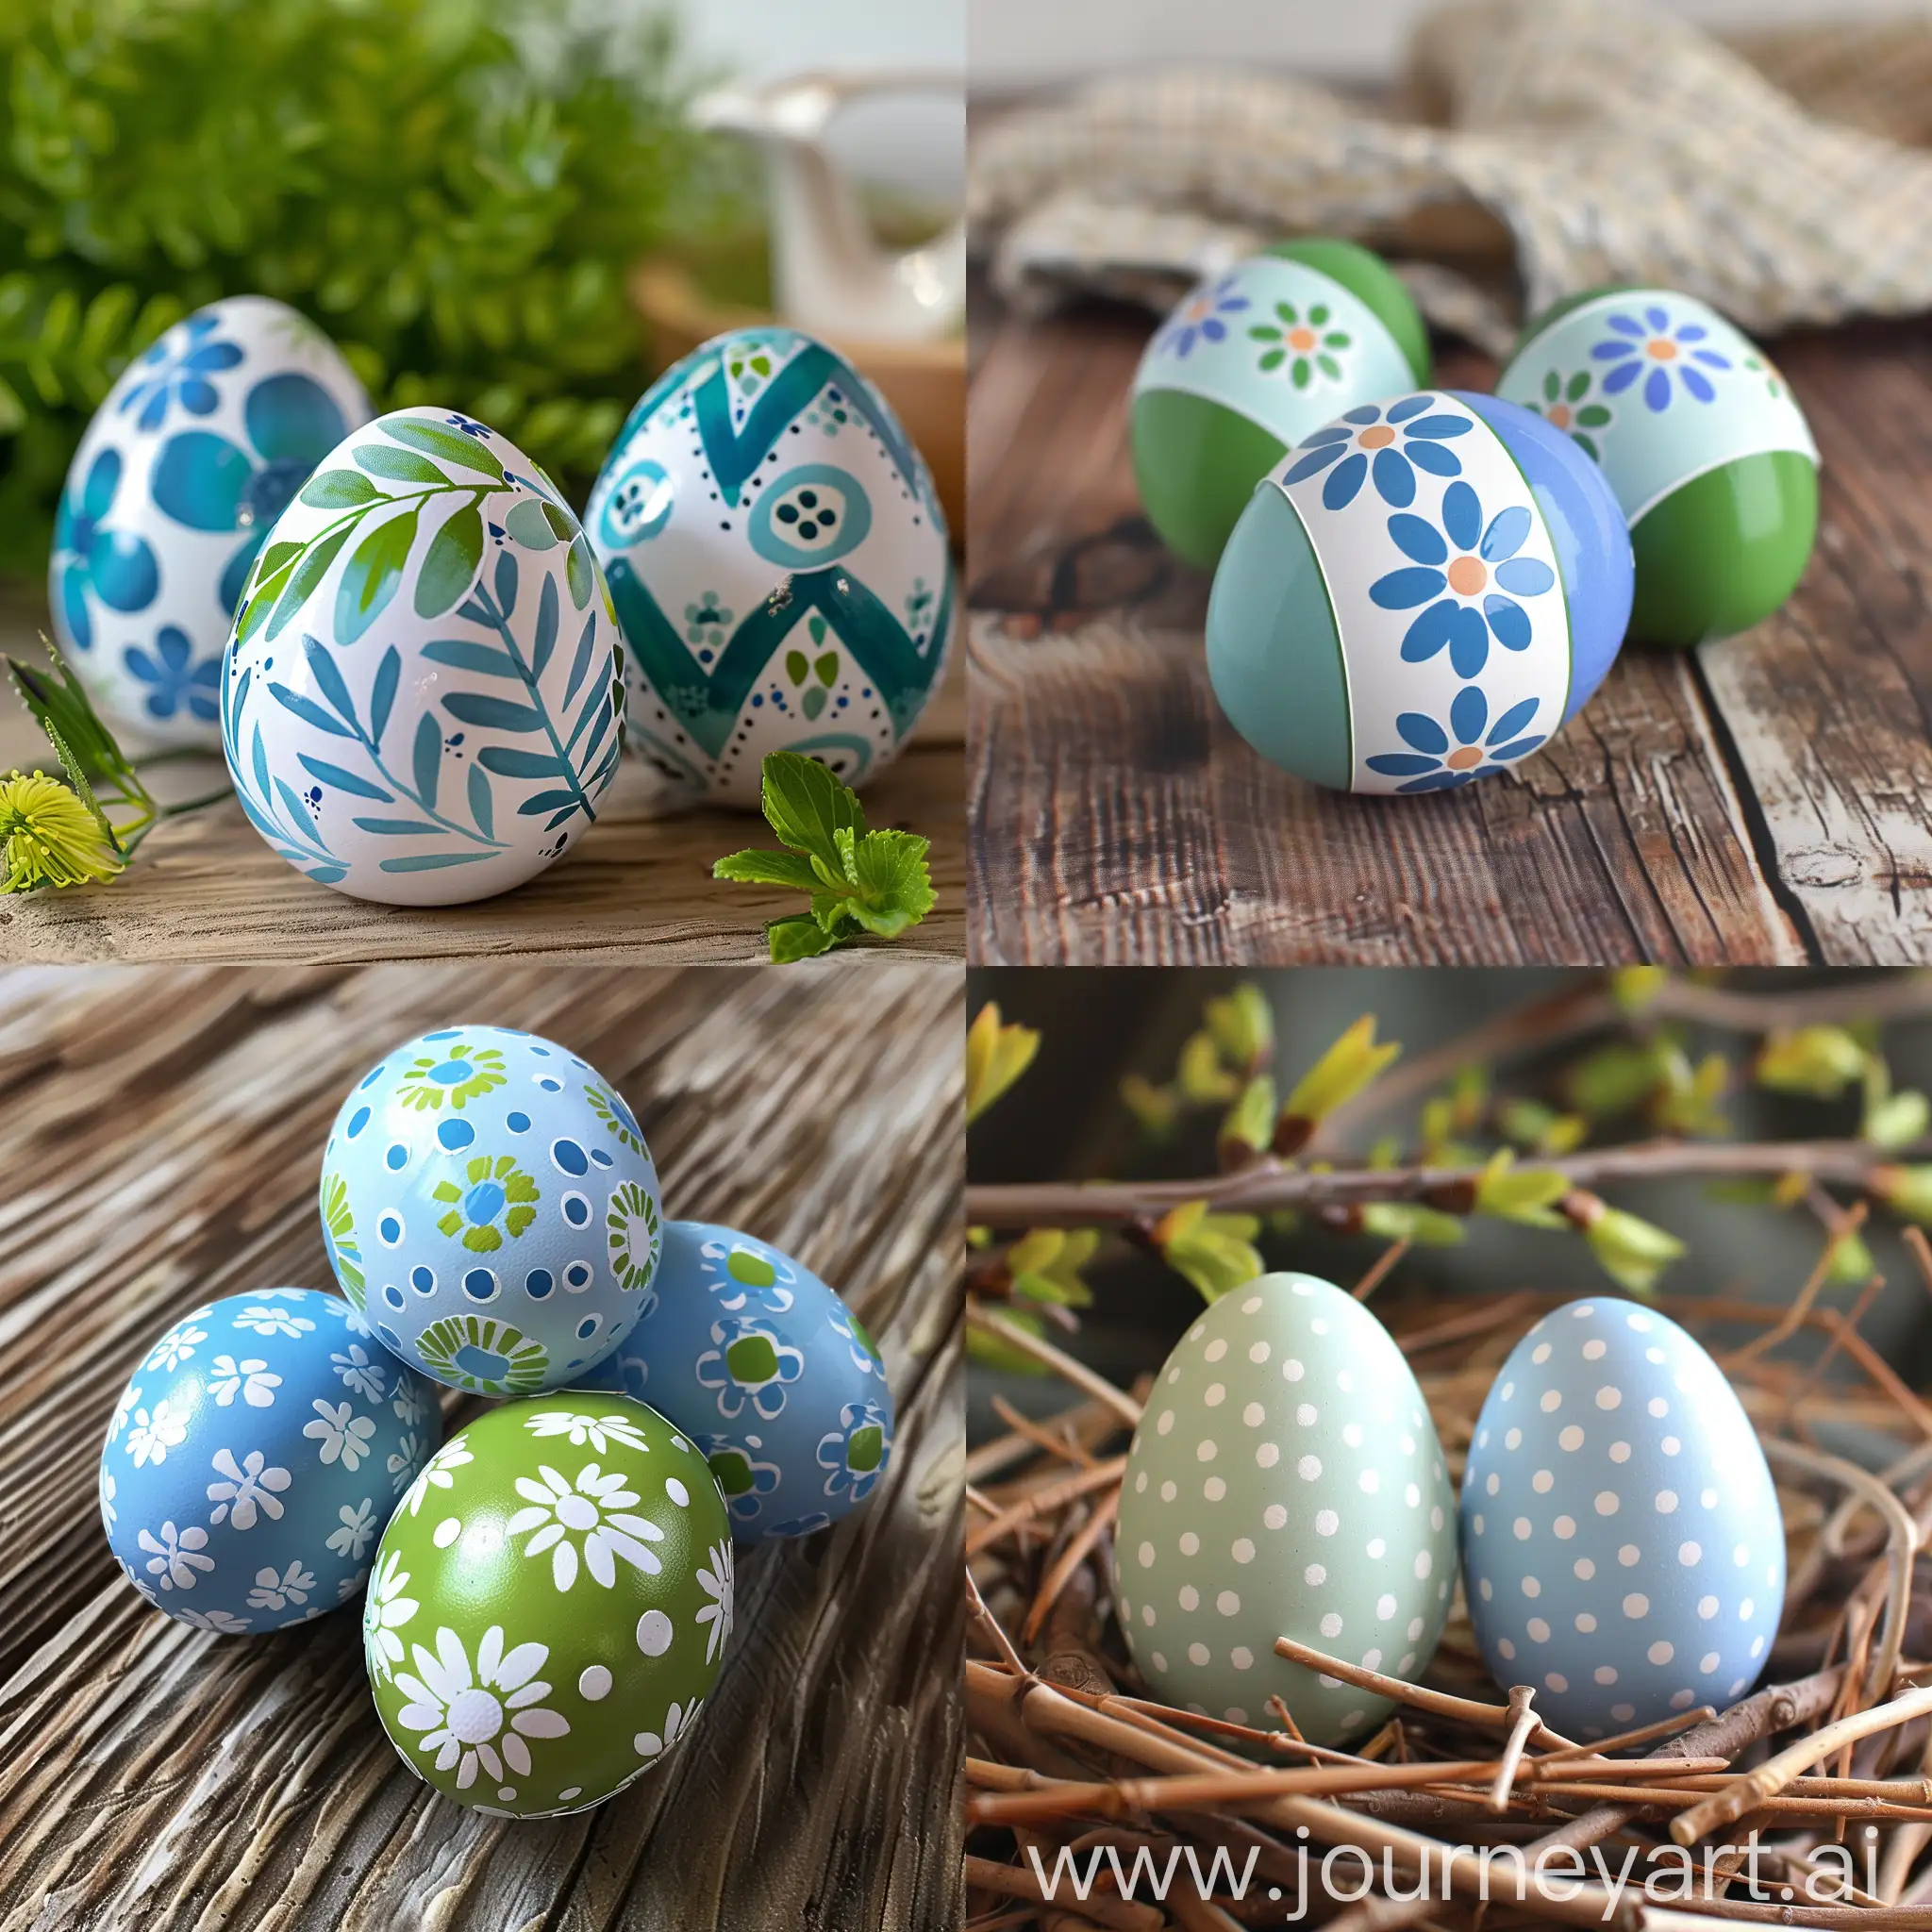 Vibrant-Easter-Egg-Stickers-in-Blue-Green-and-White